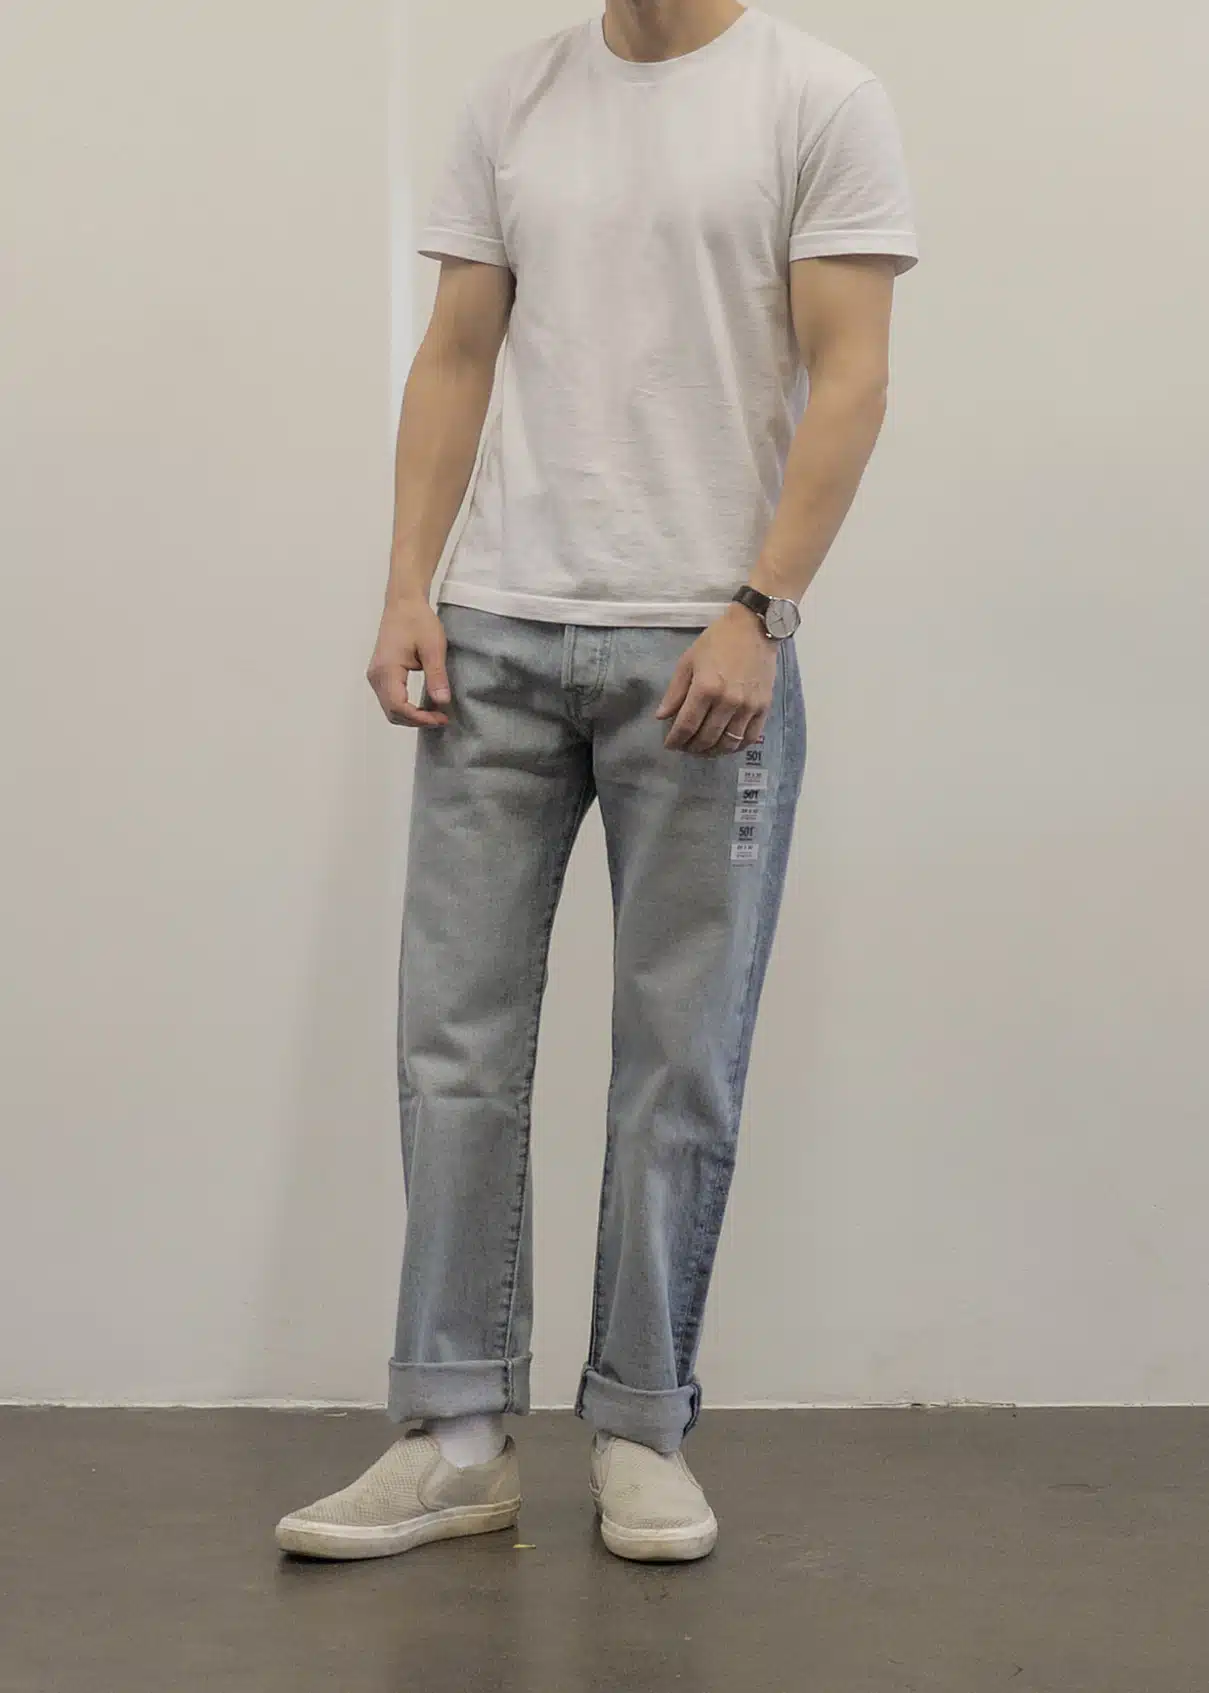 Levis 501 cuffed front